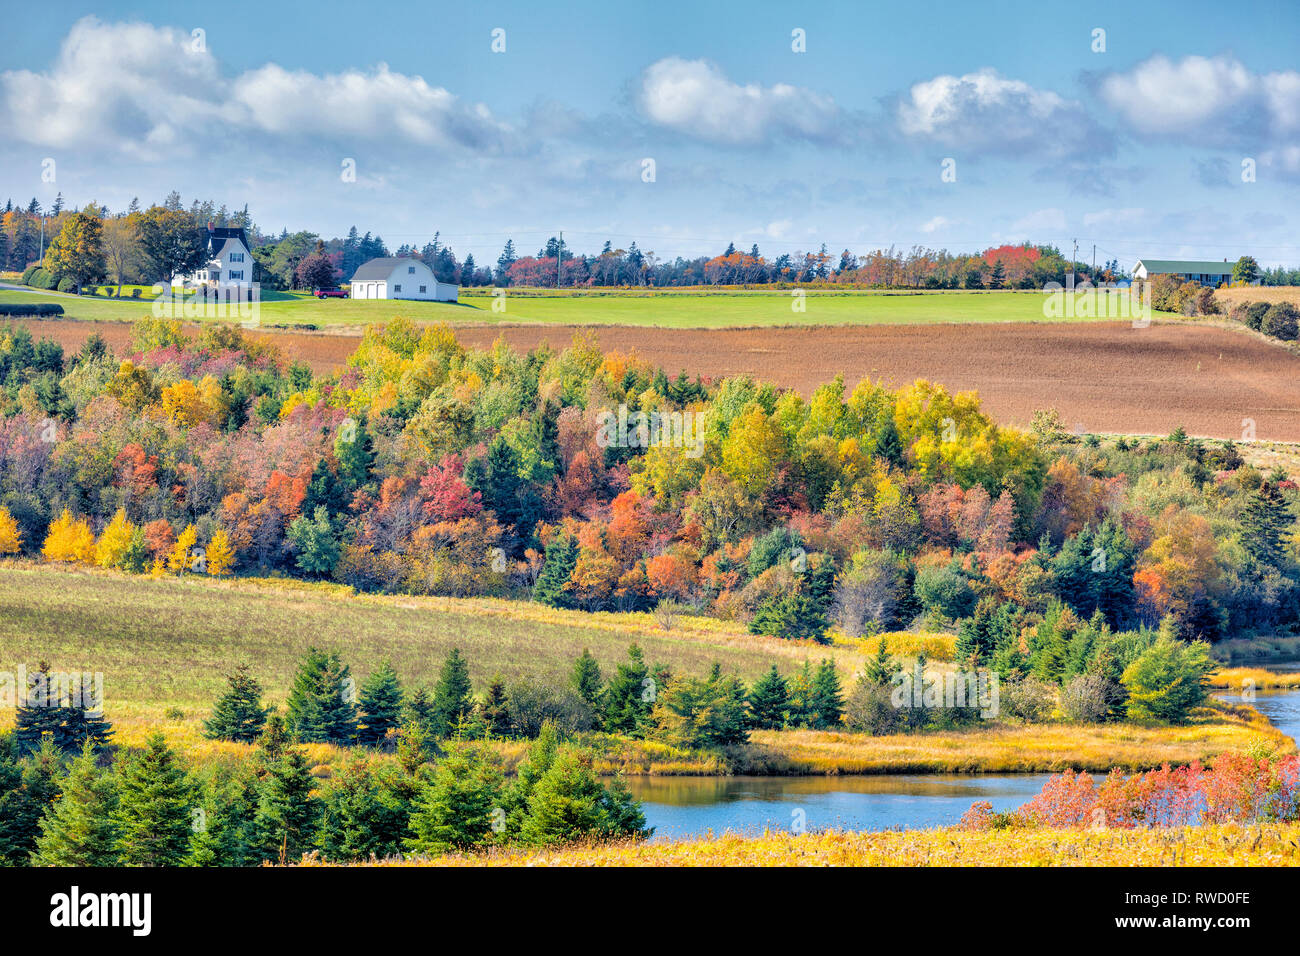 Simpsoms Mill Road, Hope River, Prince Edward Island, Canada Banque D'Images